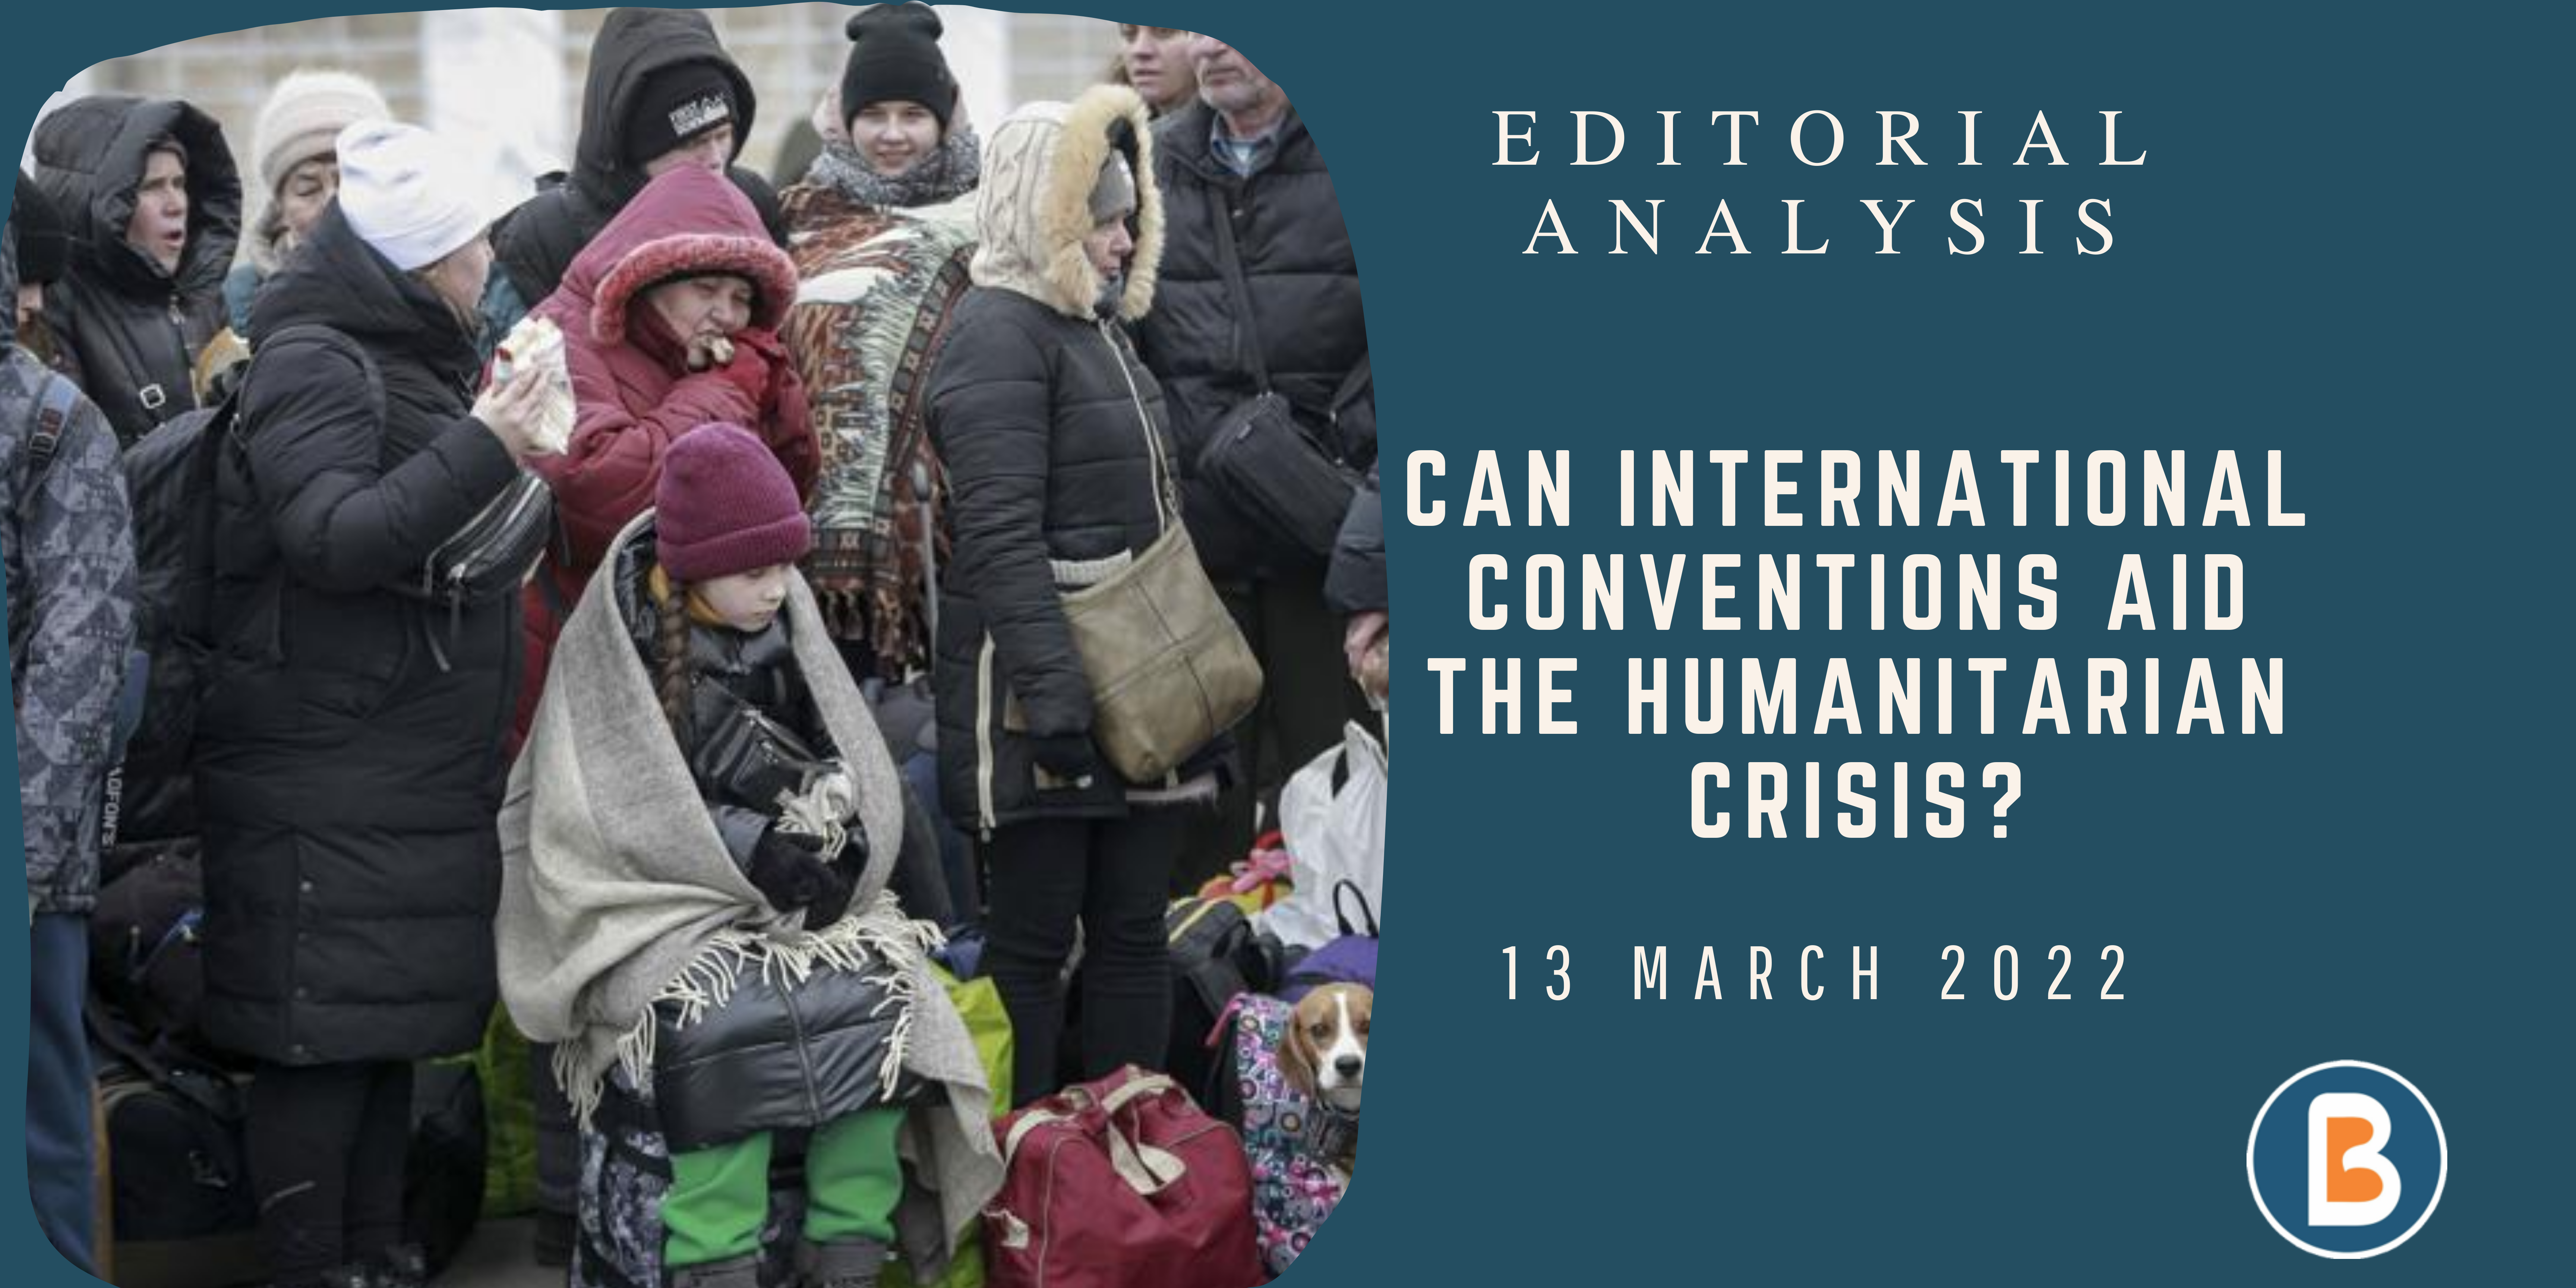 Editorial Analysis for IAS - Can International Conventions aid the Humanitarian Crisis?